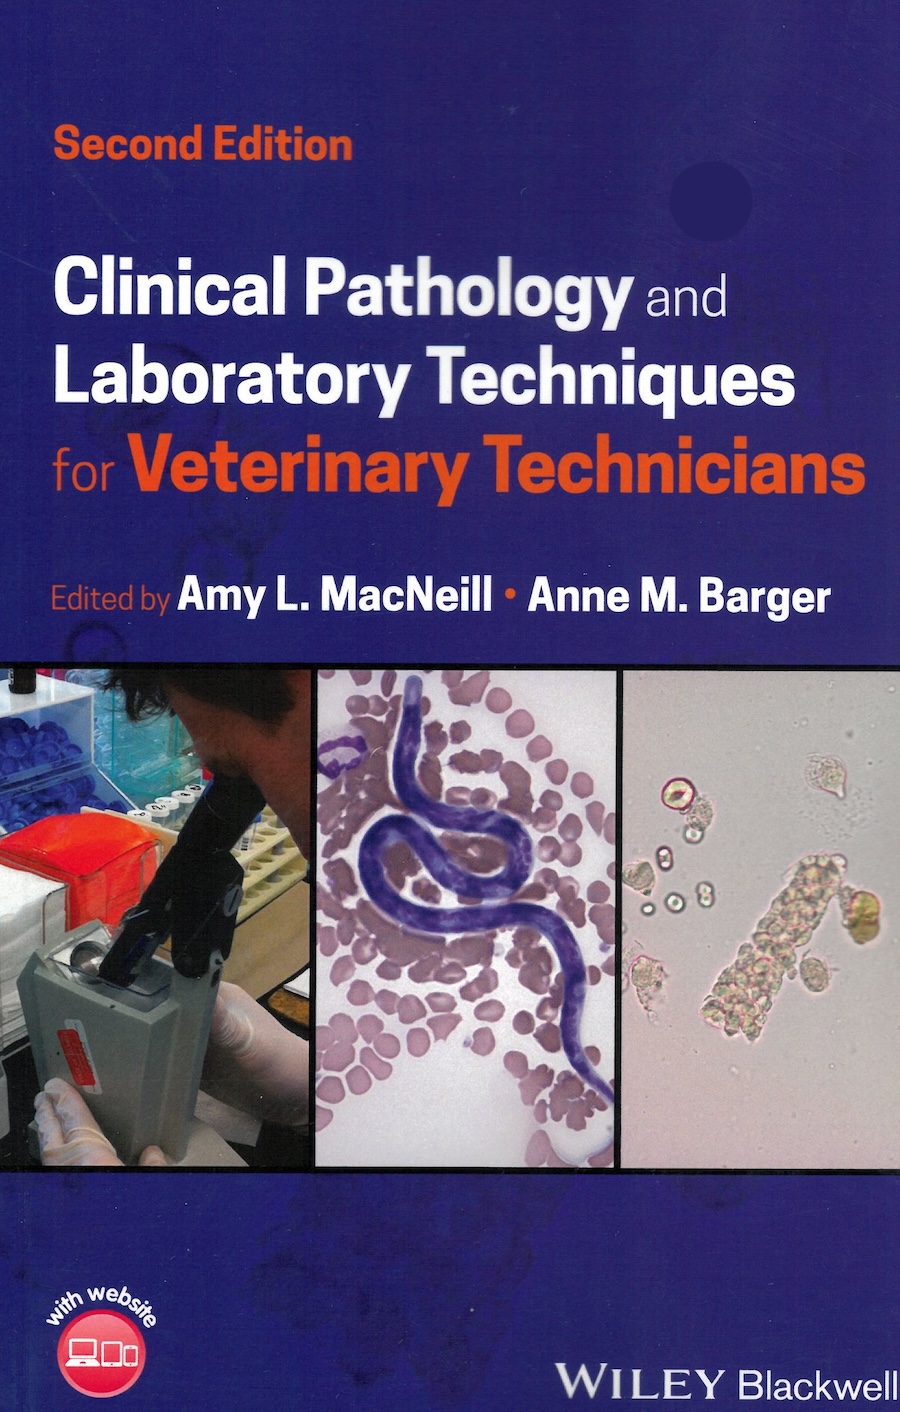 Clinical pathology and laboratory techniques for veterinary technicians